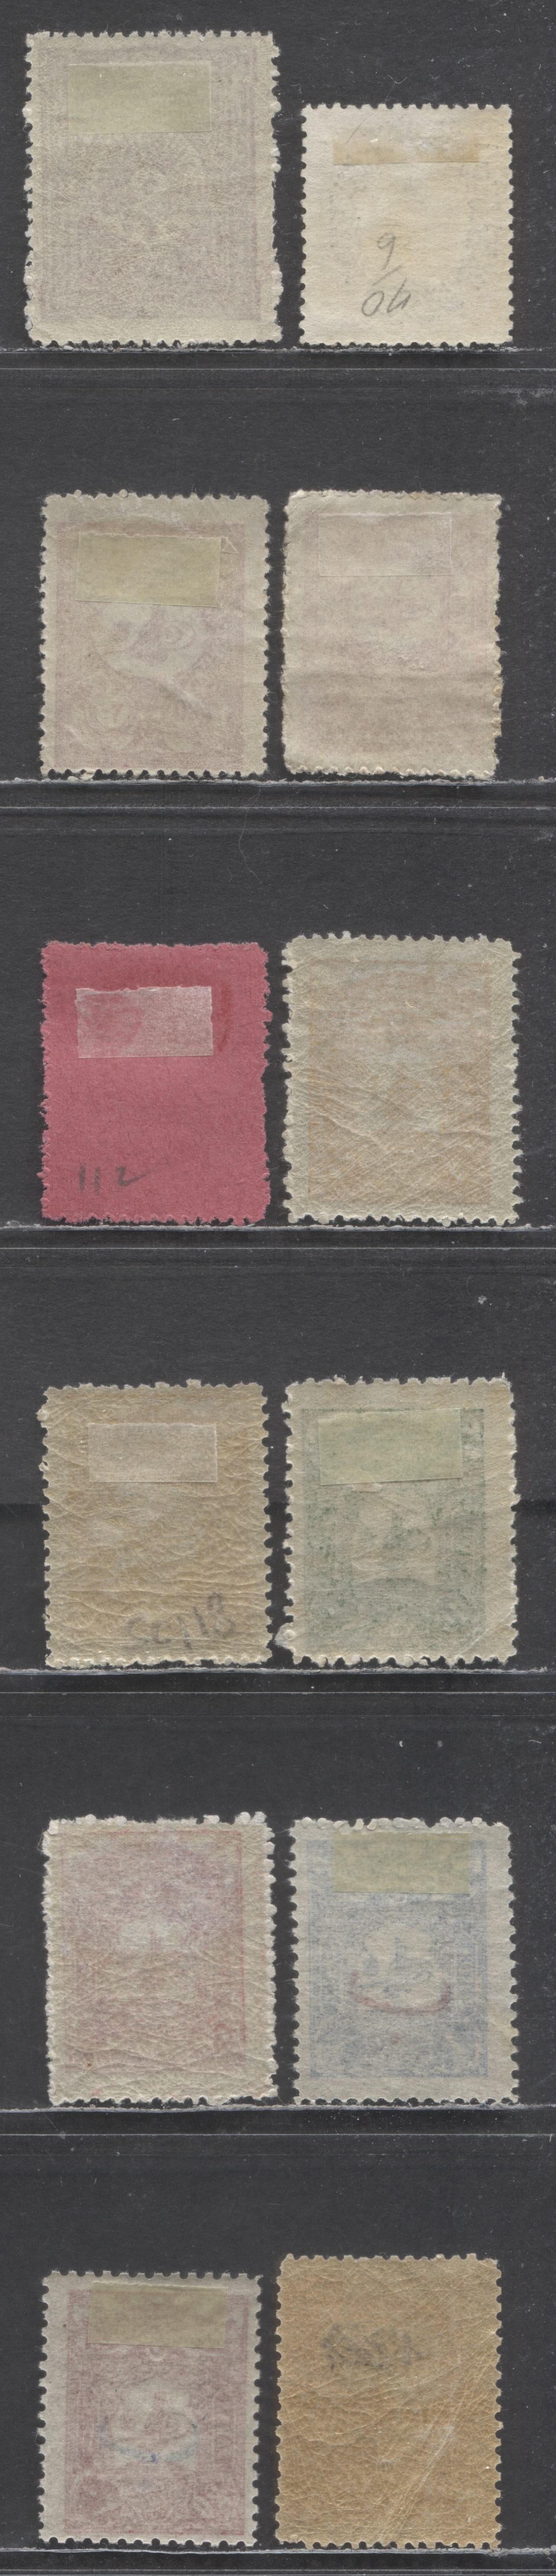 Lot 9 Turkey SC#44/P49 1876-1905 Star/Crescent, Tughra Designs & Official Overprints, A few with no gum. J44, 129-130. Two different perfs of 5pa ochre, 12 F/VFOG & Unused Singles, Click on Listing to See ALL Pictures, Estimated Value $15